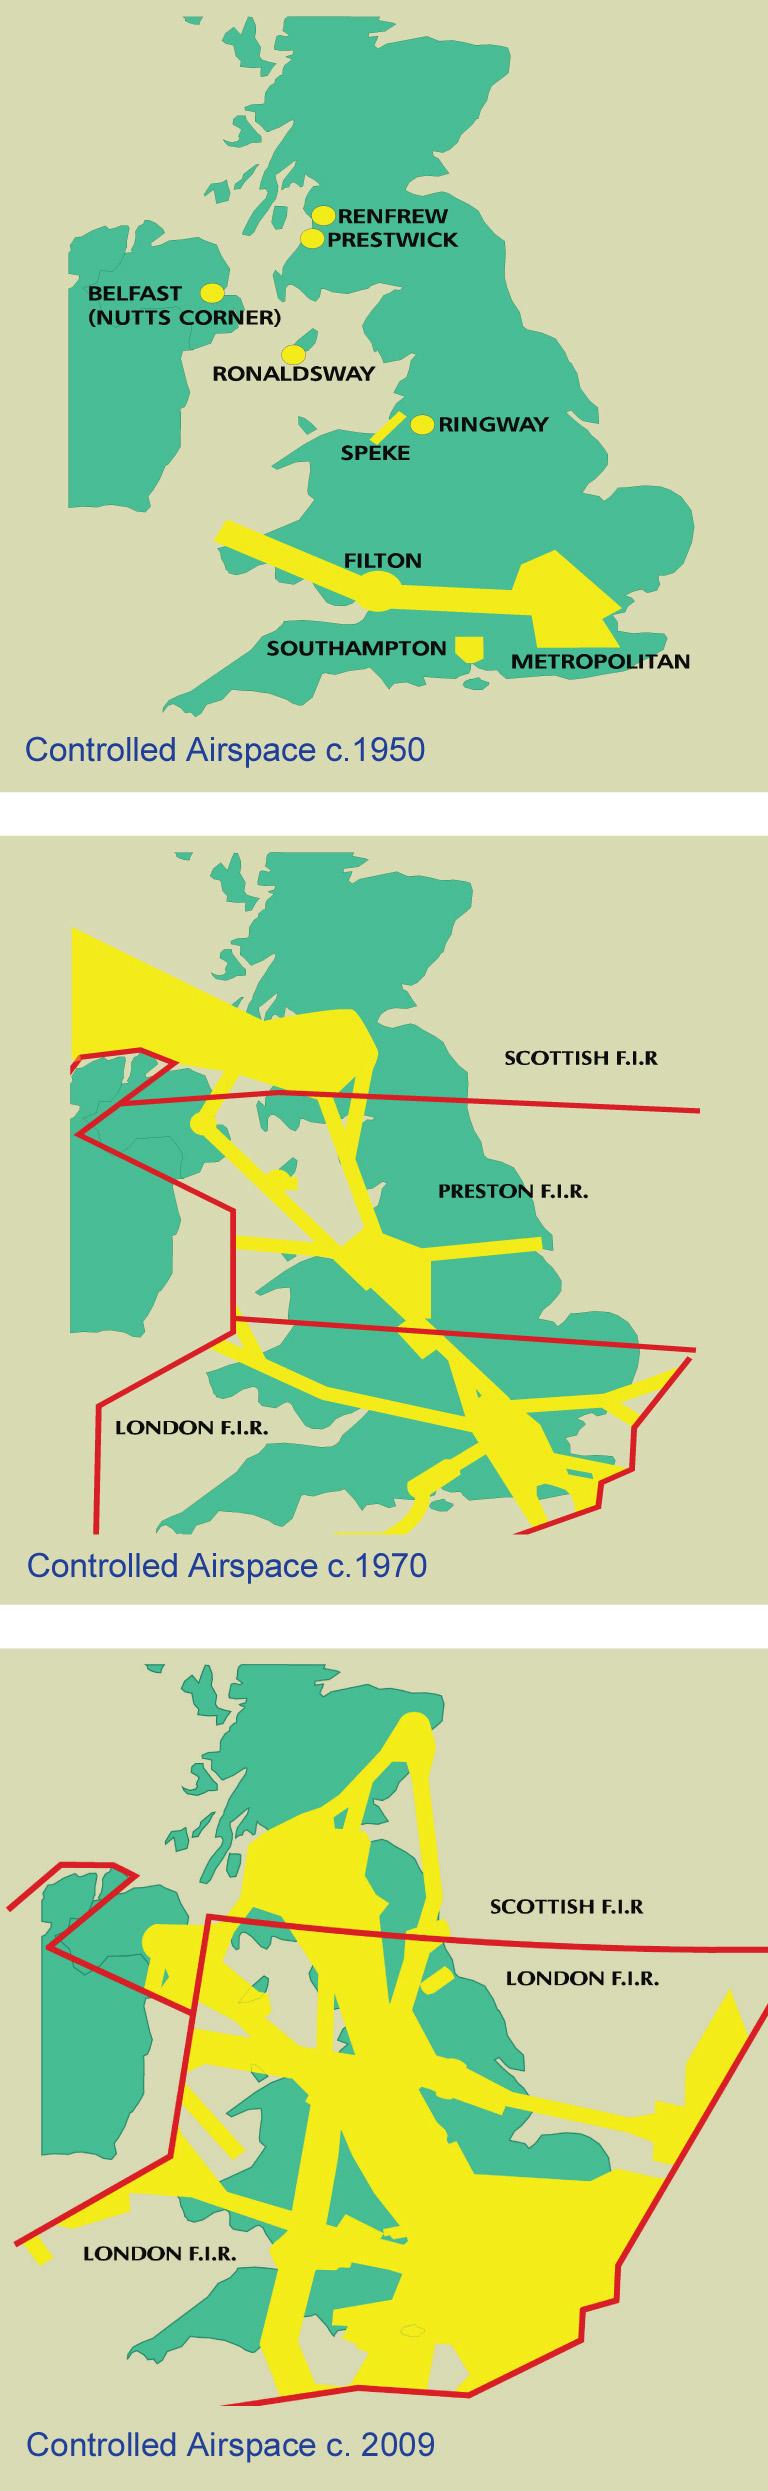 UK Airspace Today The airspace arrangements we have today are based on a system established during the post-war period when demand for airspace capacity began to grow significantly.